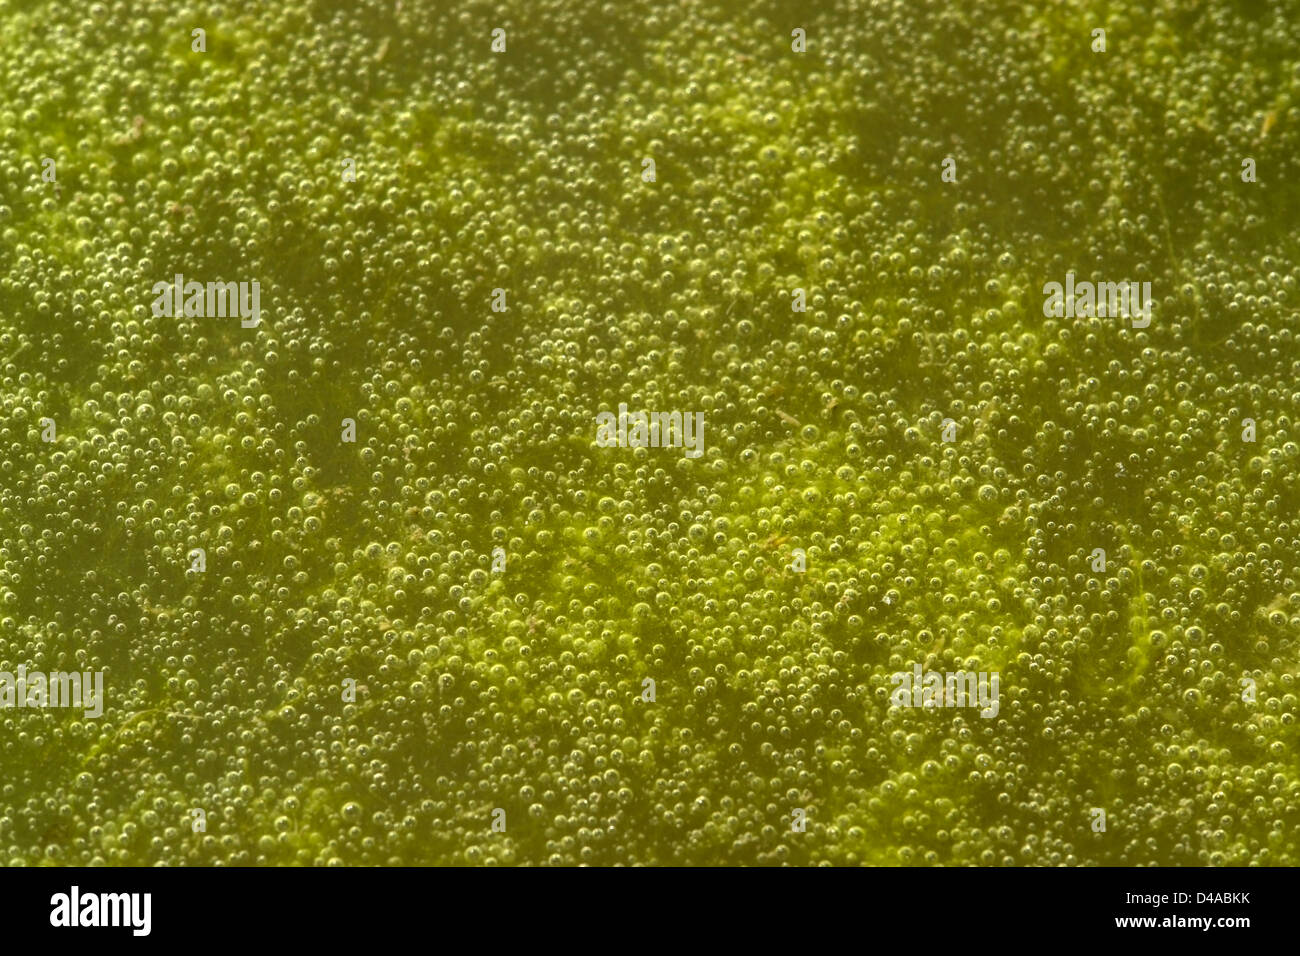 full frame abstract organic slimy substance with algae and bubbles Stock Photo